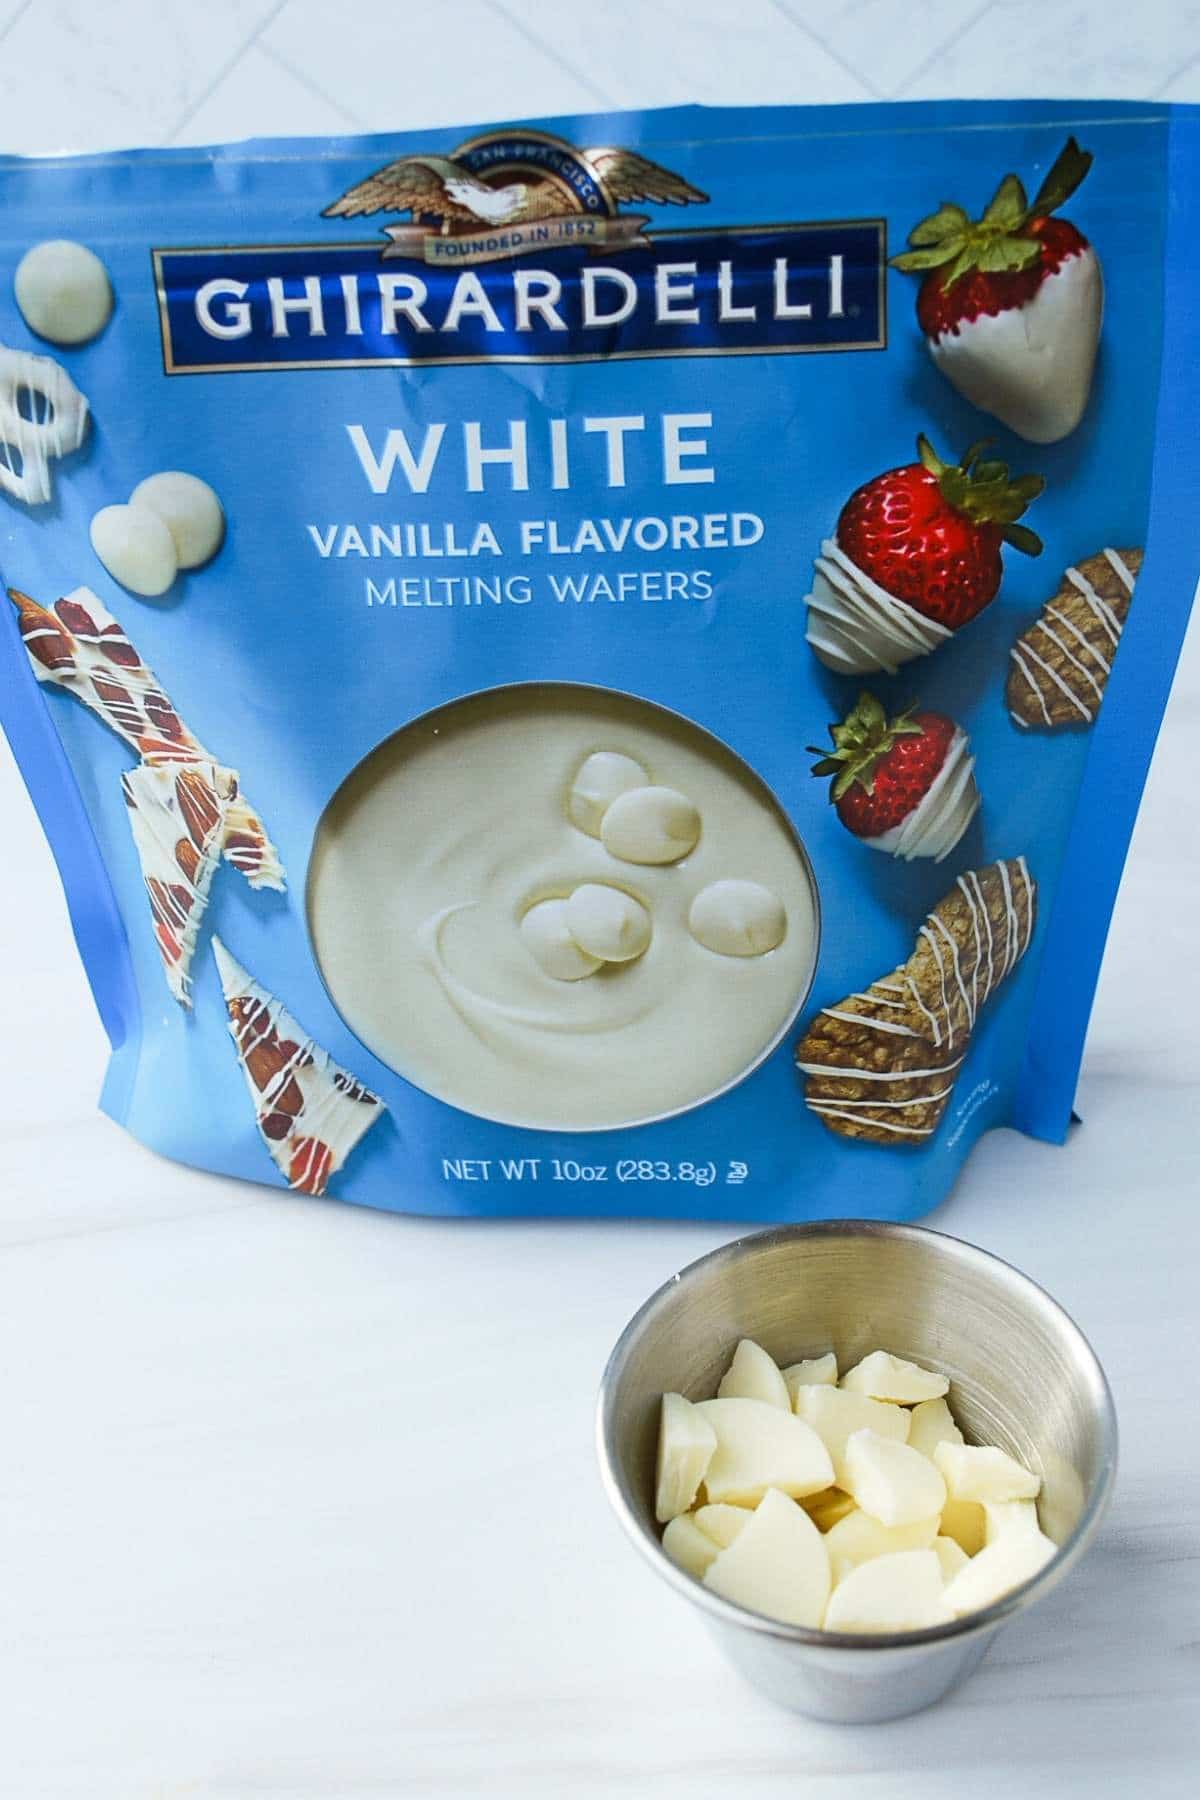 Ghiradelli white chocolate chips in a bag with a cup of chopped white chocolate